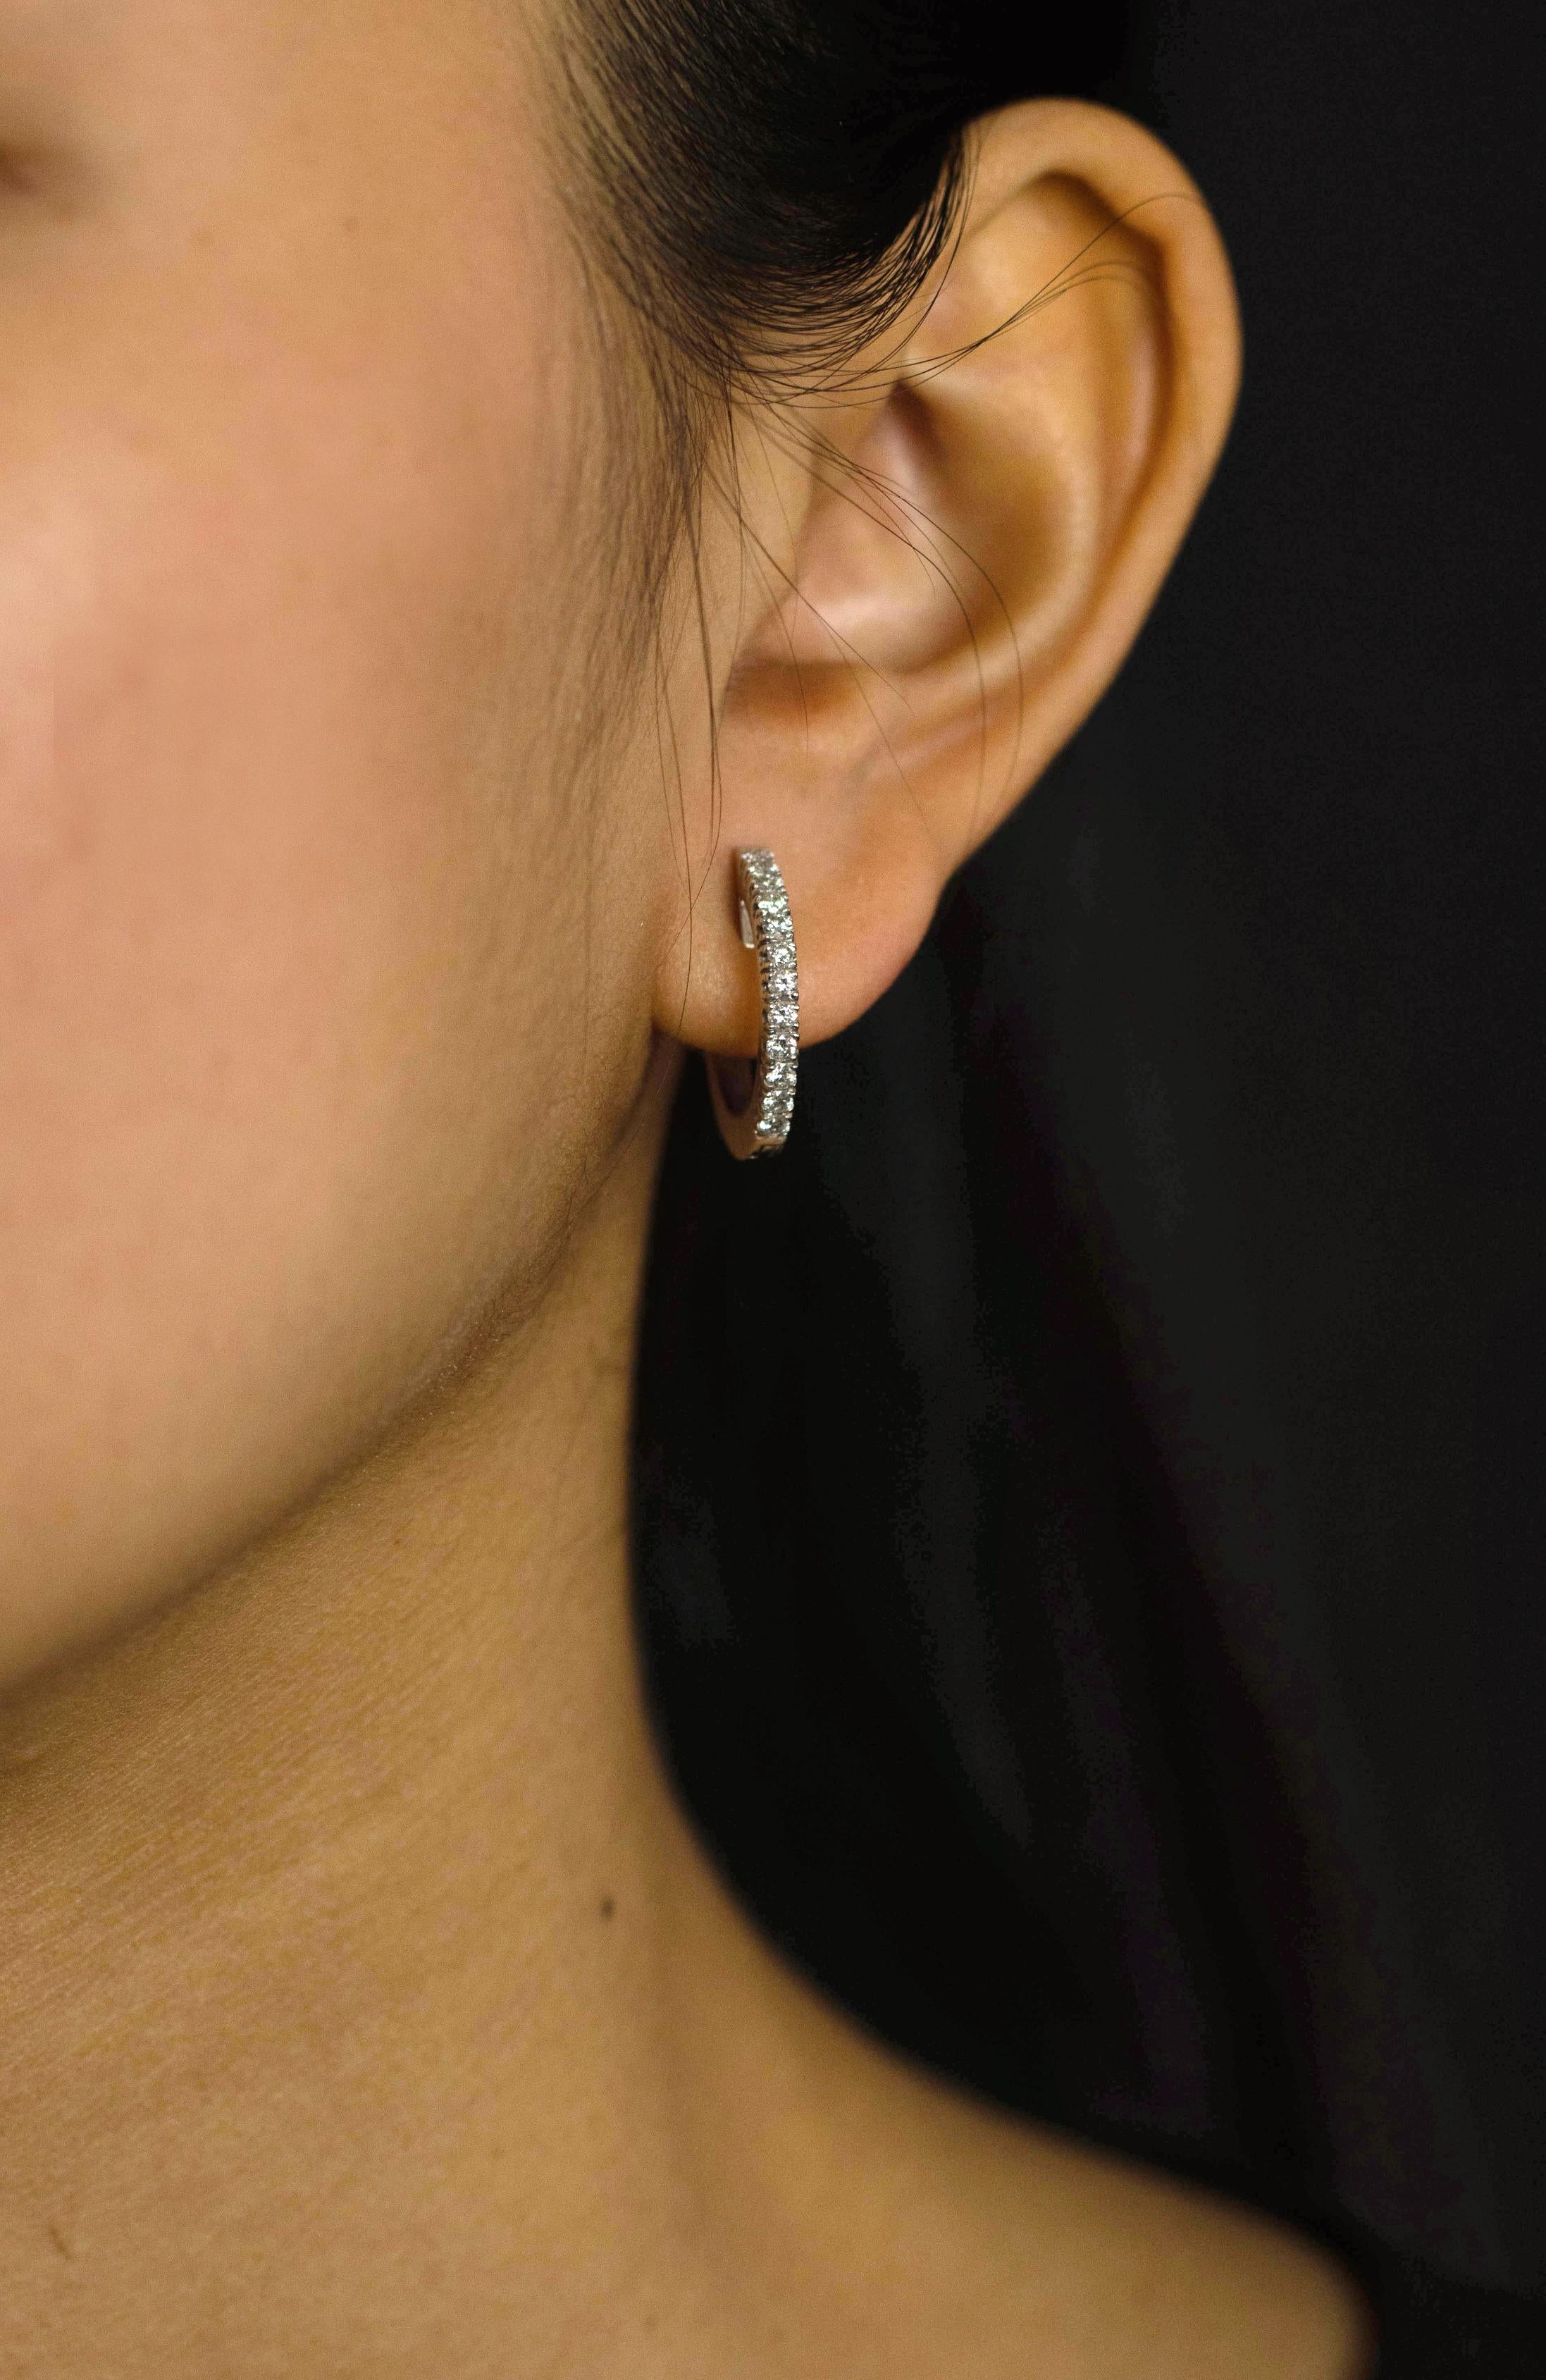 A simple pair of hoop earrings showcasing a row of round brilliant diamonds weighing 0.64 carats total, set in a shared prong basket setting. Finely made in 18k white gold.

Style available in different price ranges. Prices are based on your